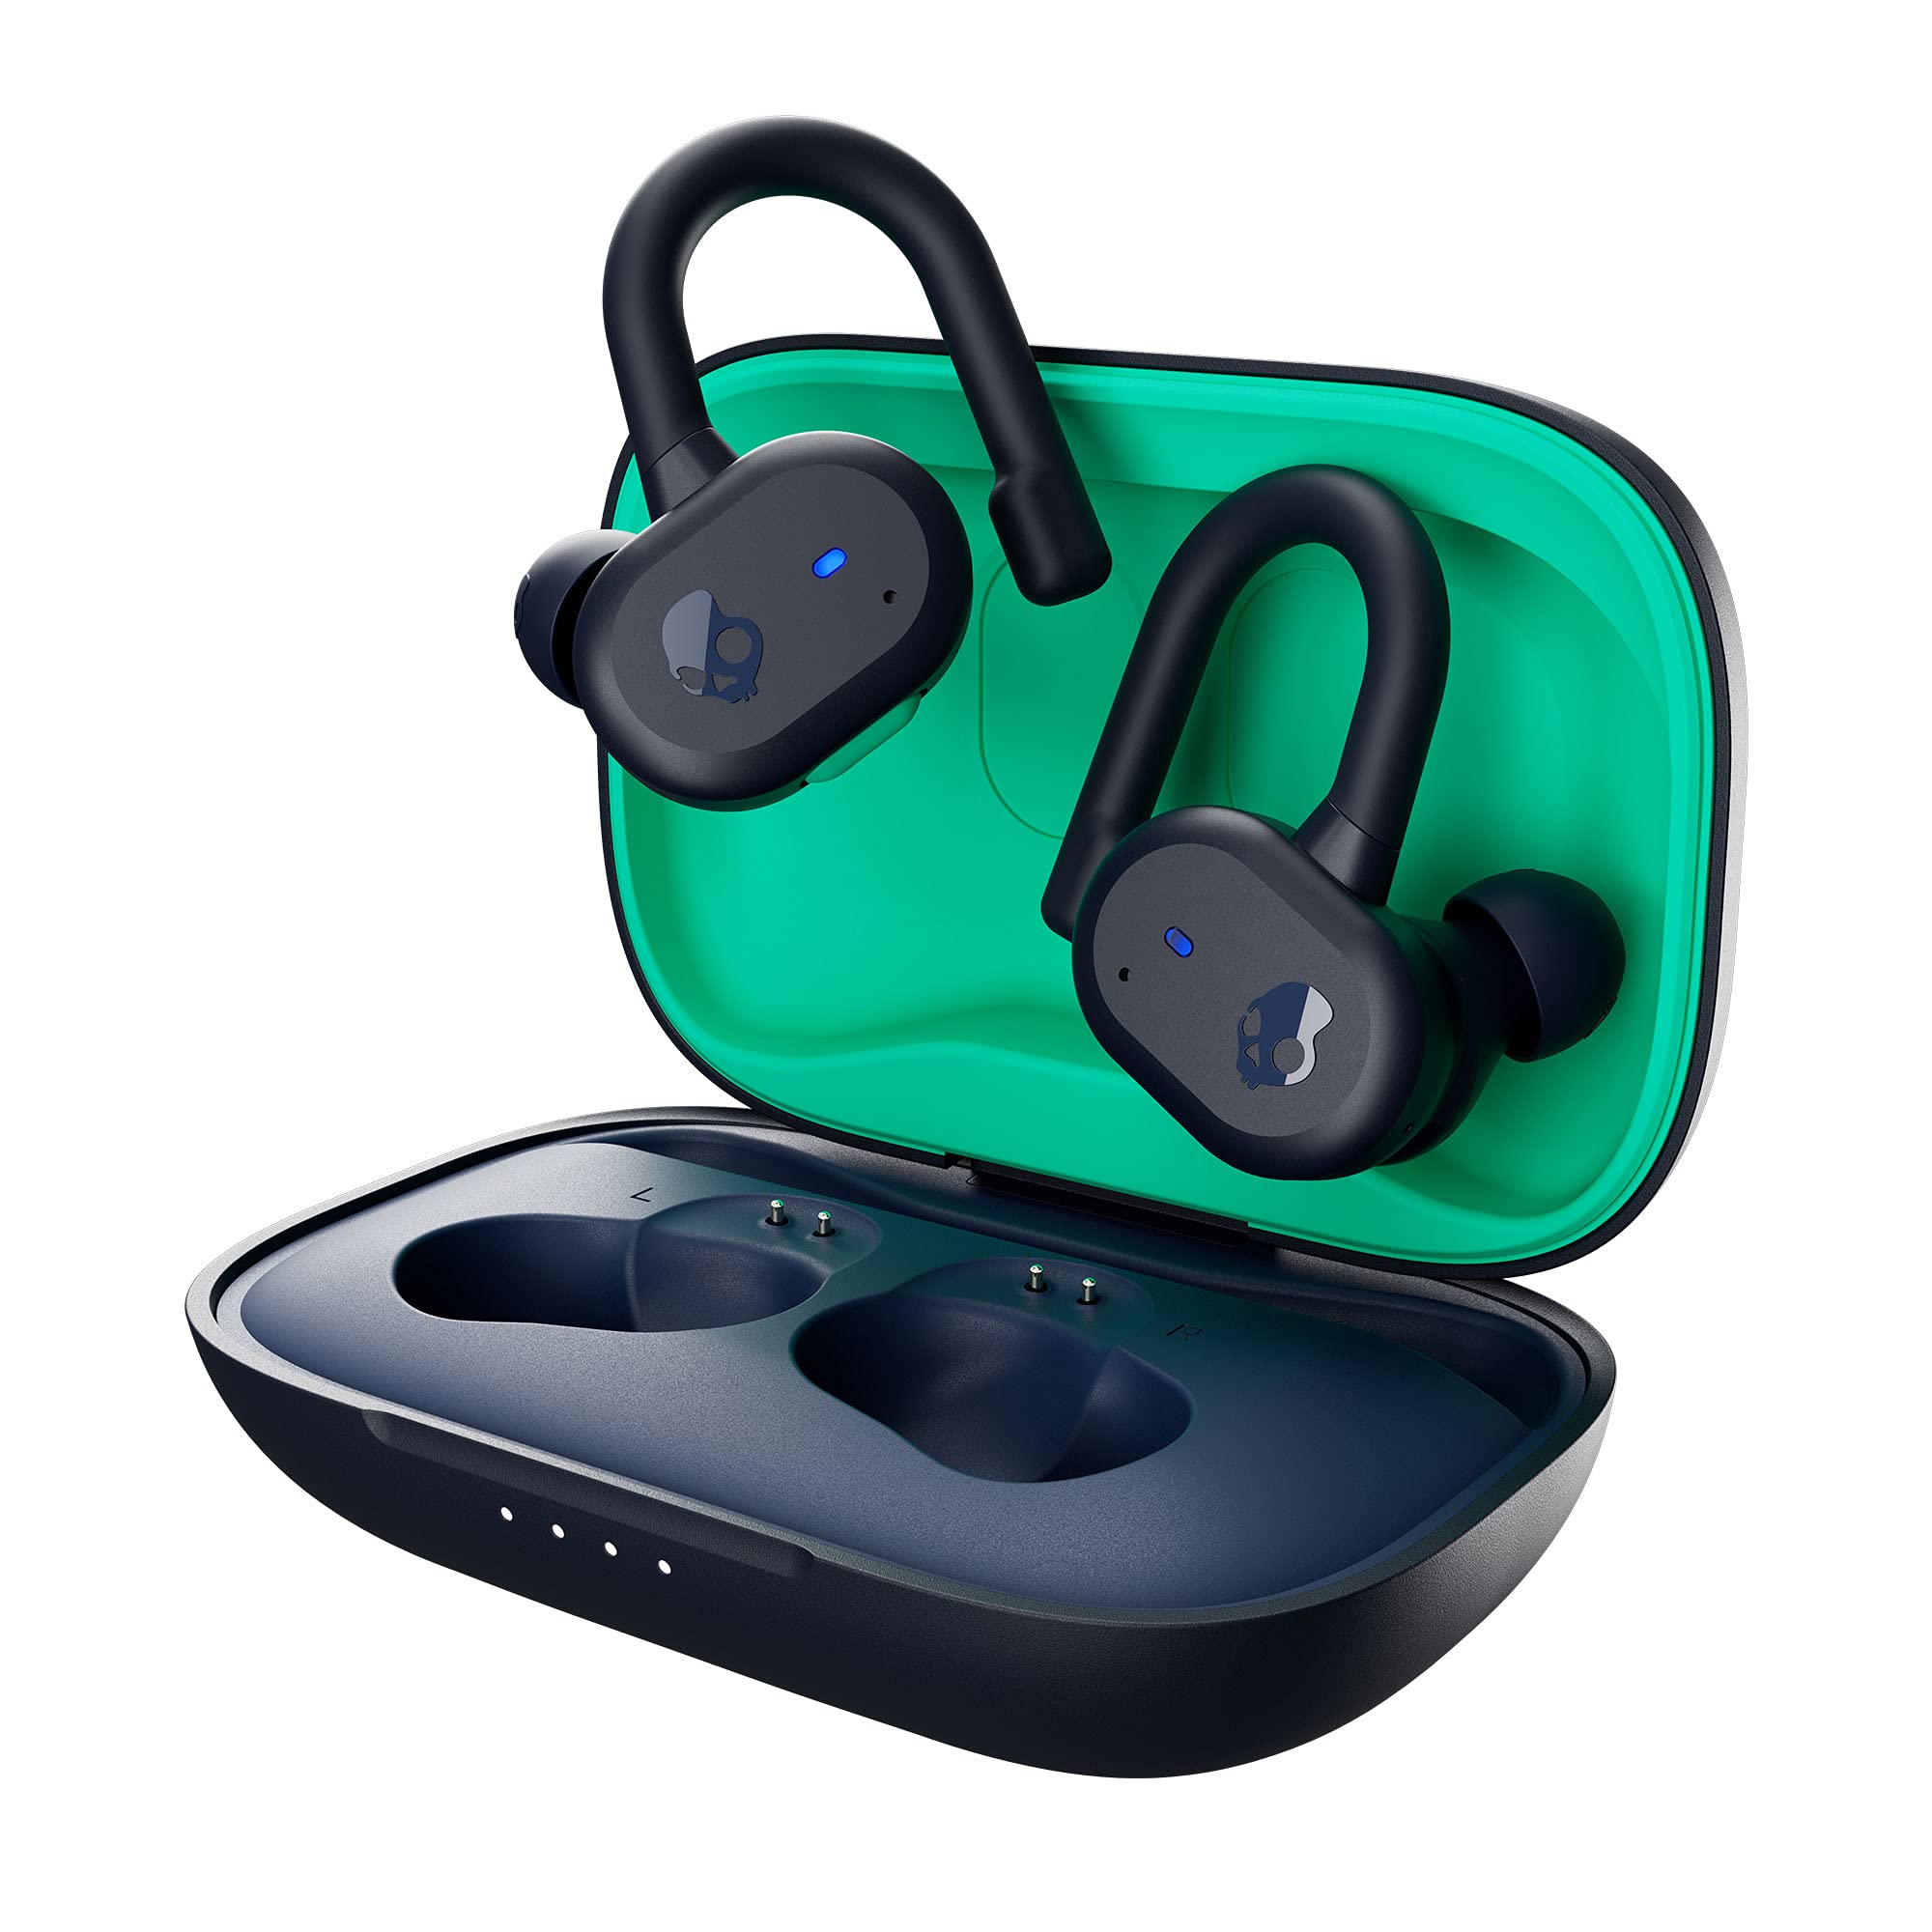 Pairing Your Skullcandy Wireless Earbuds: Step-by-Step